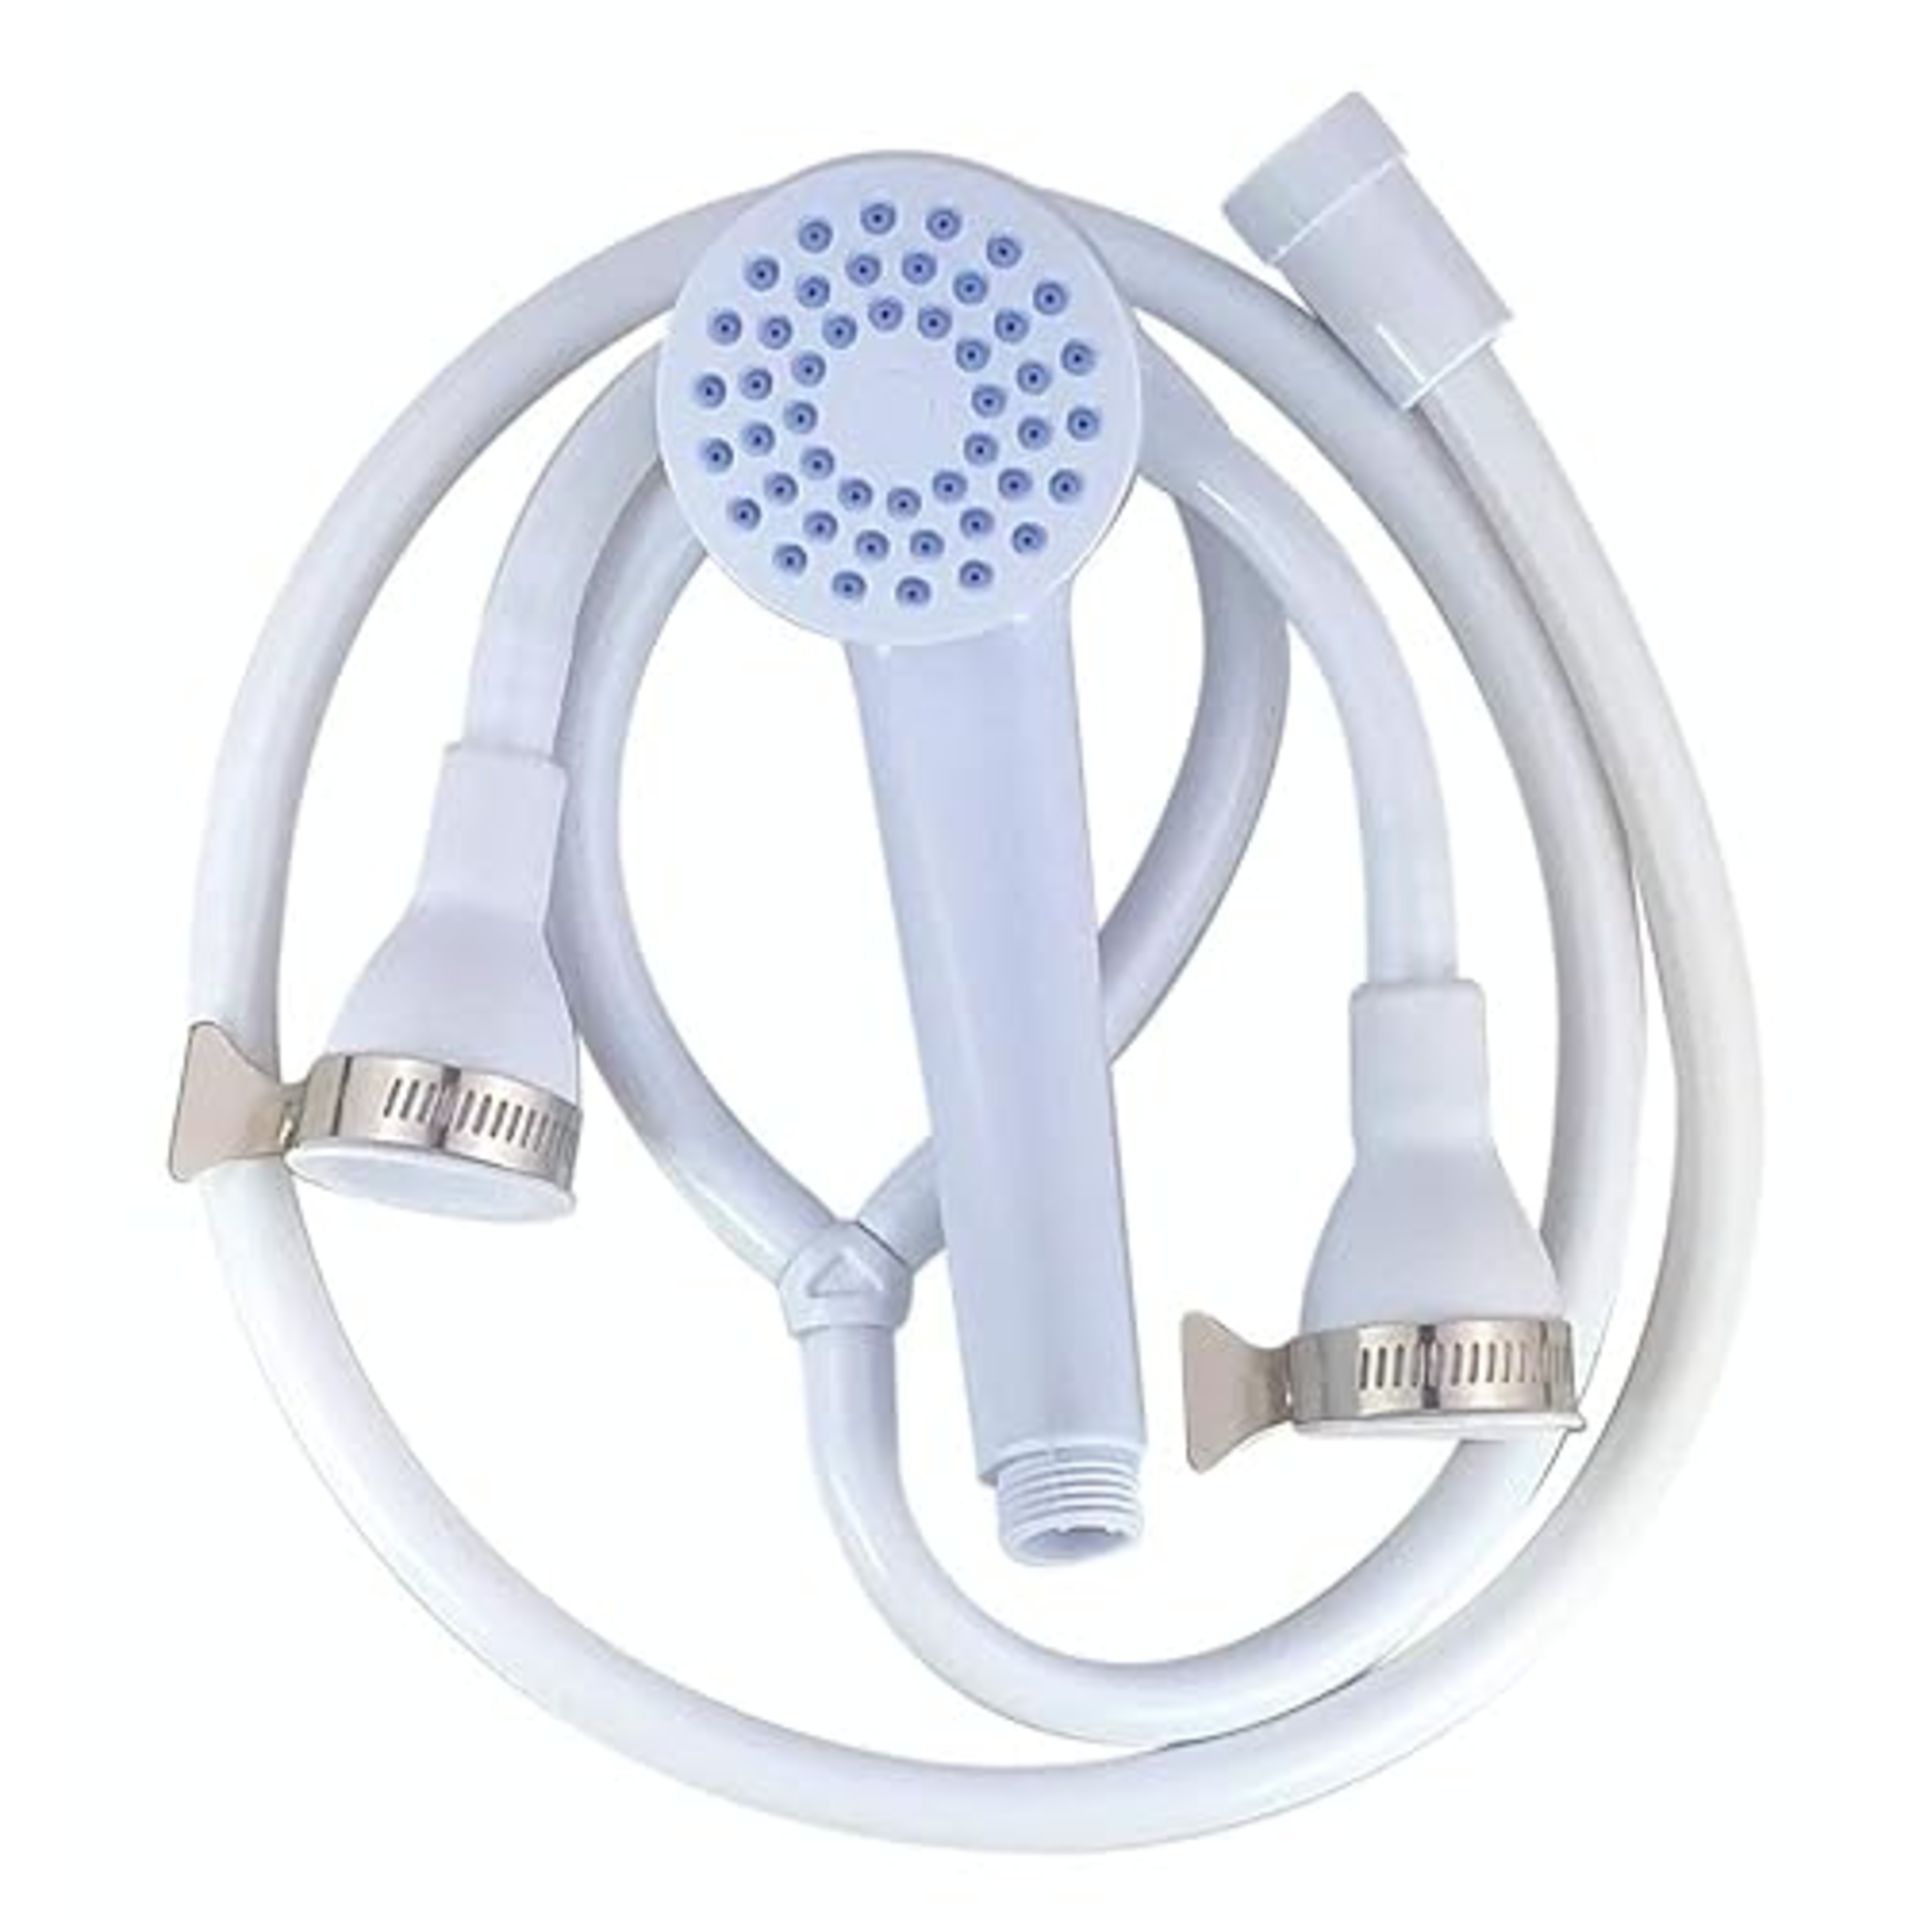 Home Flair Portable Shower | Push On Tap Shower Head and Hose | Shower Attachment for Bath Taps | |